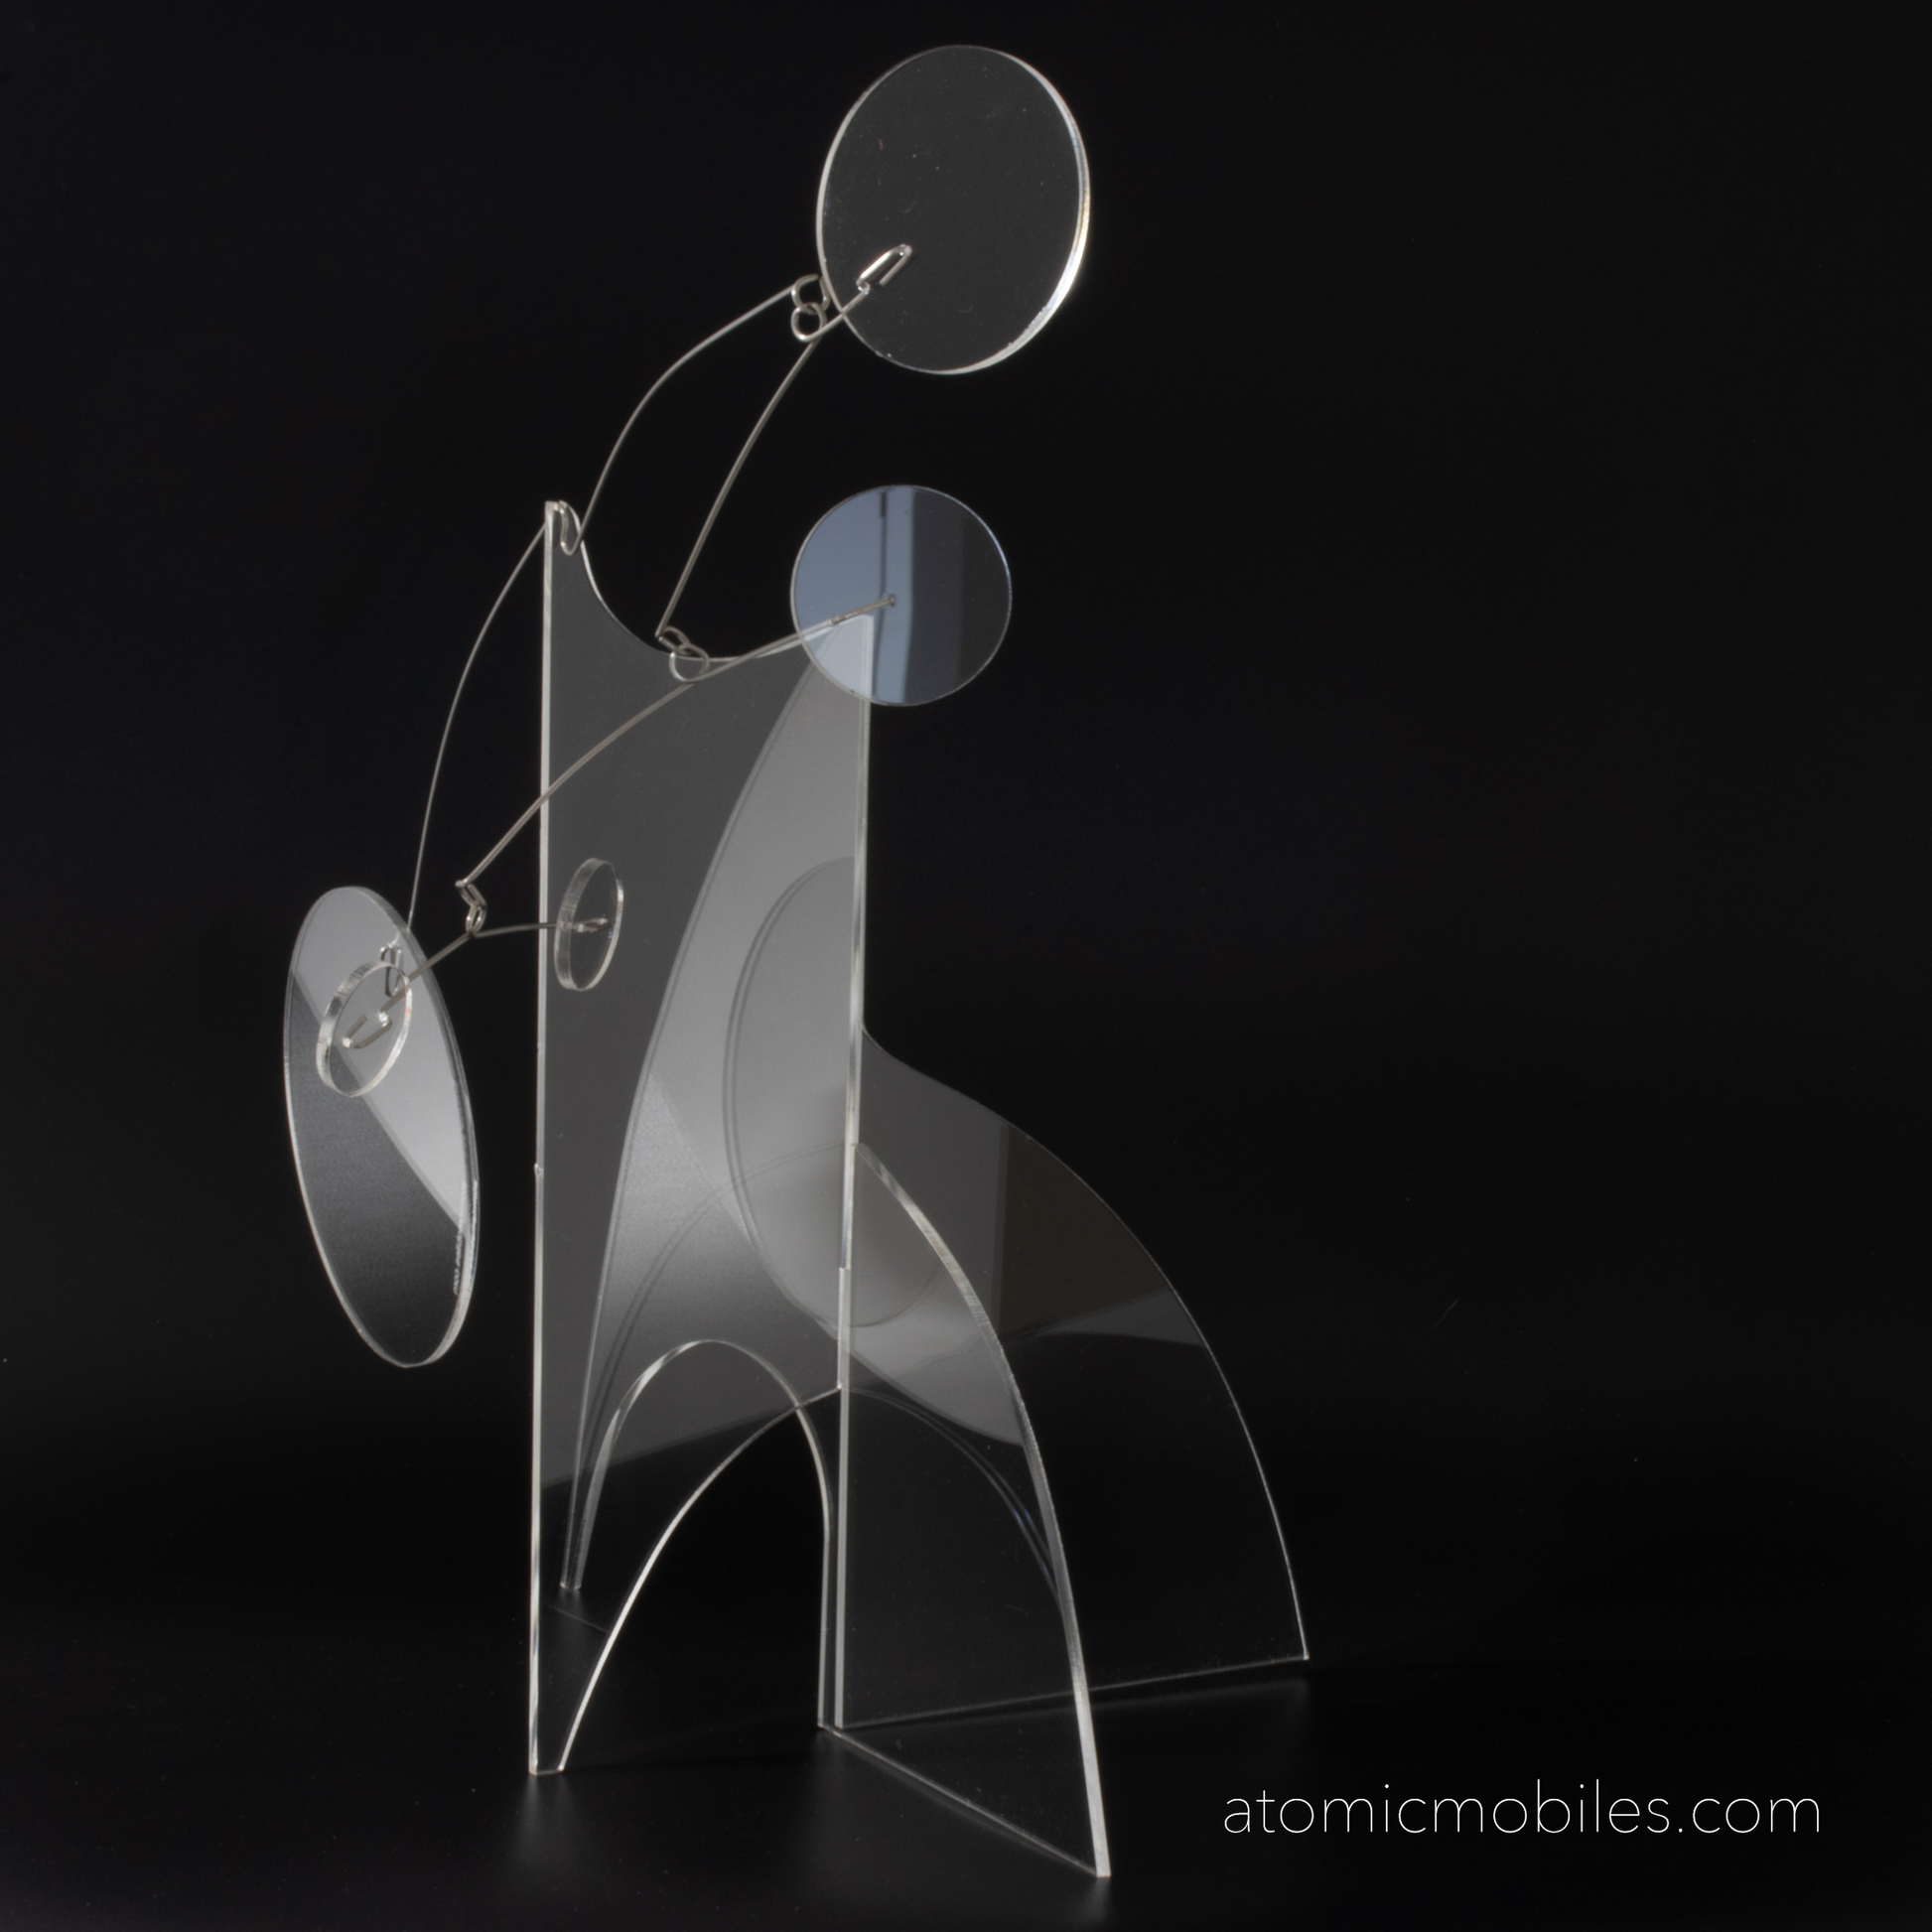 Beautiful Clear Moderne Art Stabile - mid century modern kinetic art in clear plexiglass acrylic by AtomicMobiles.com